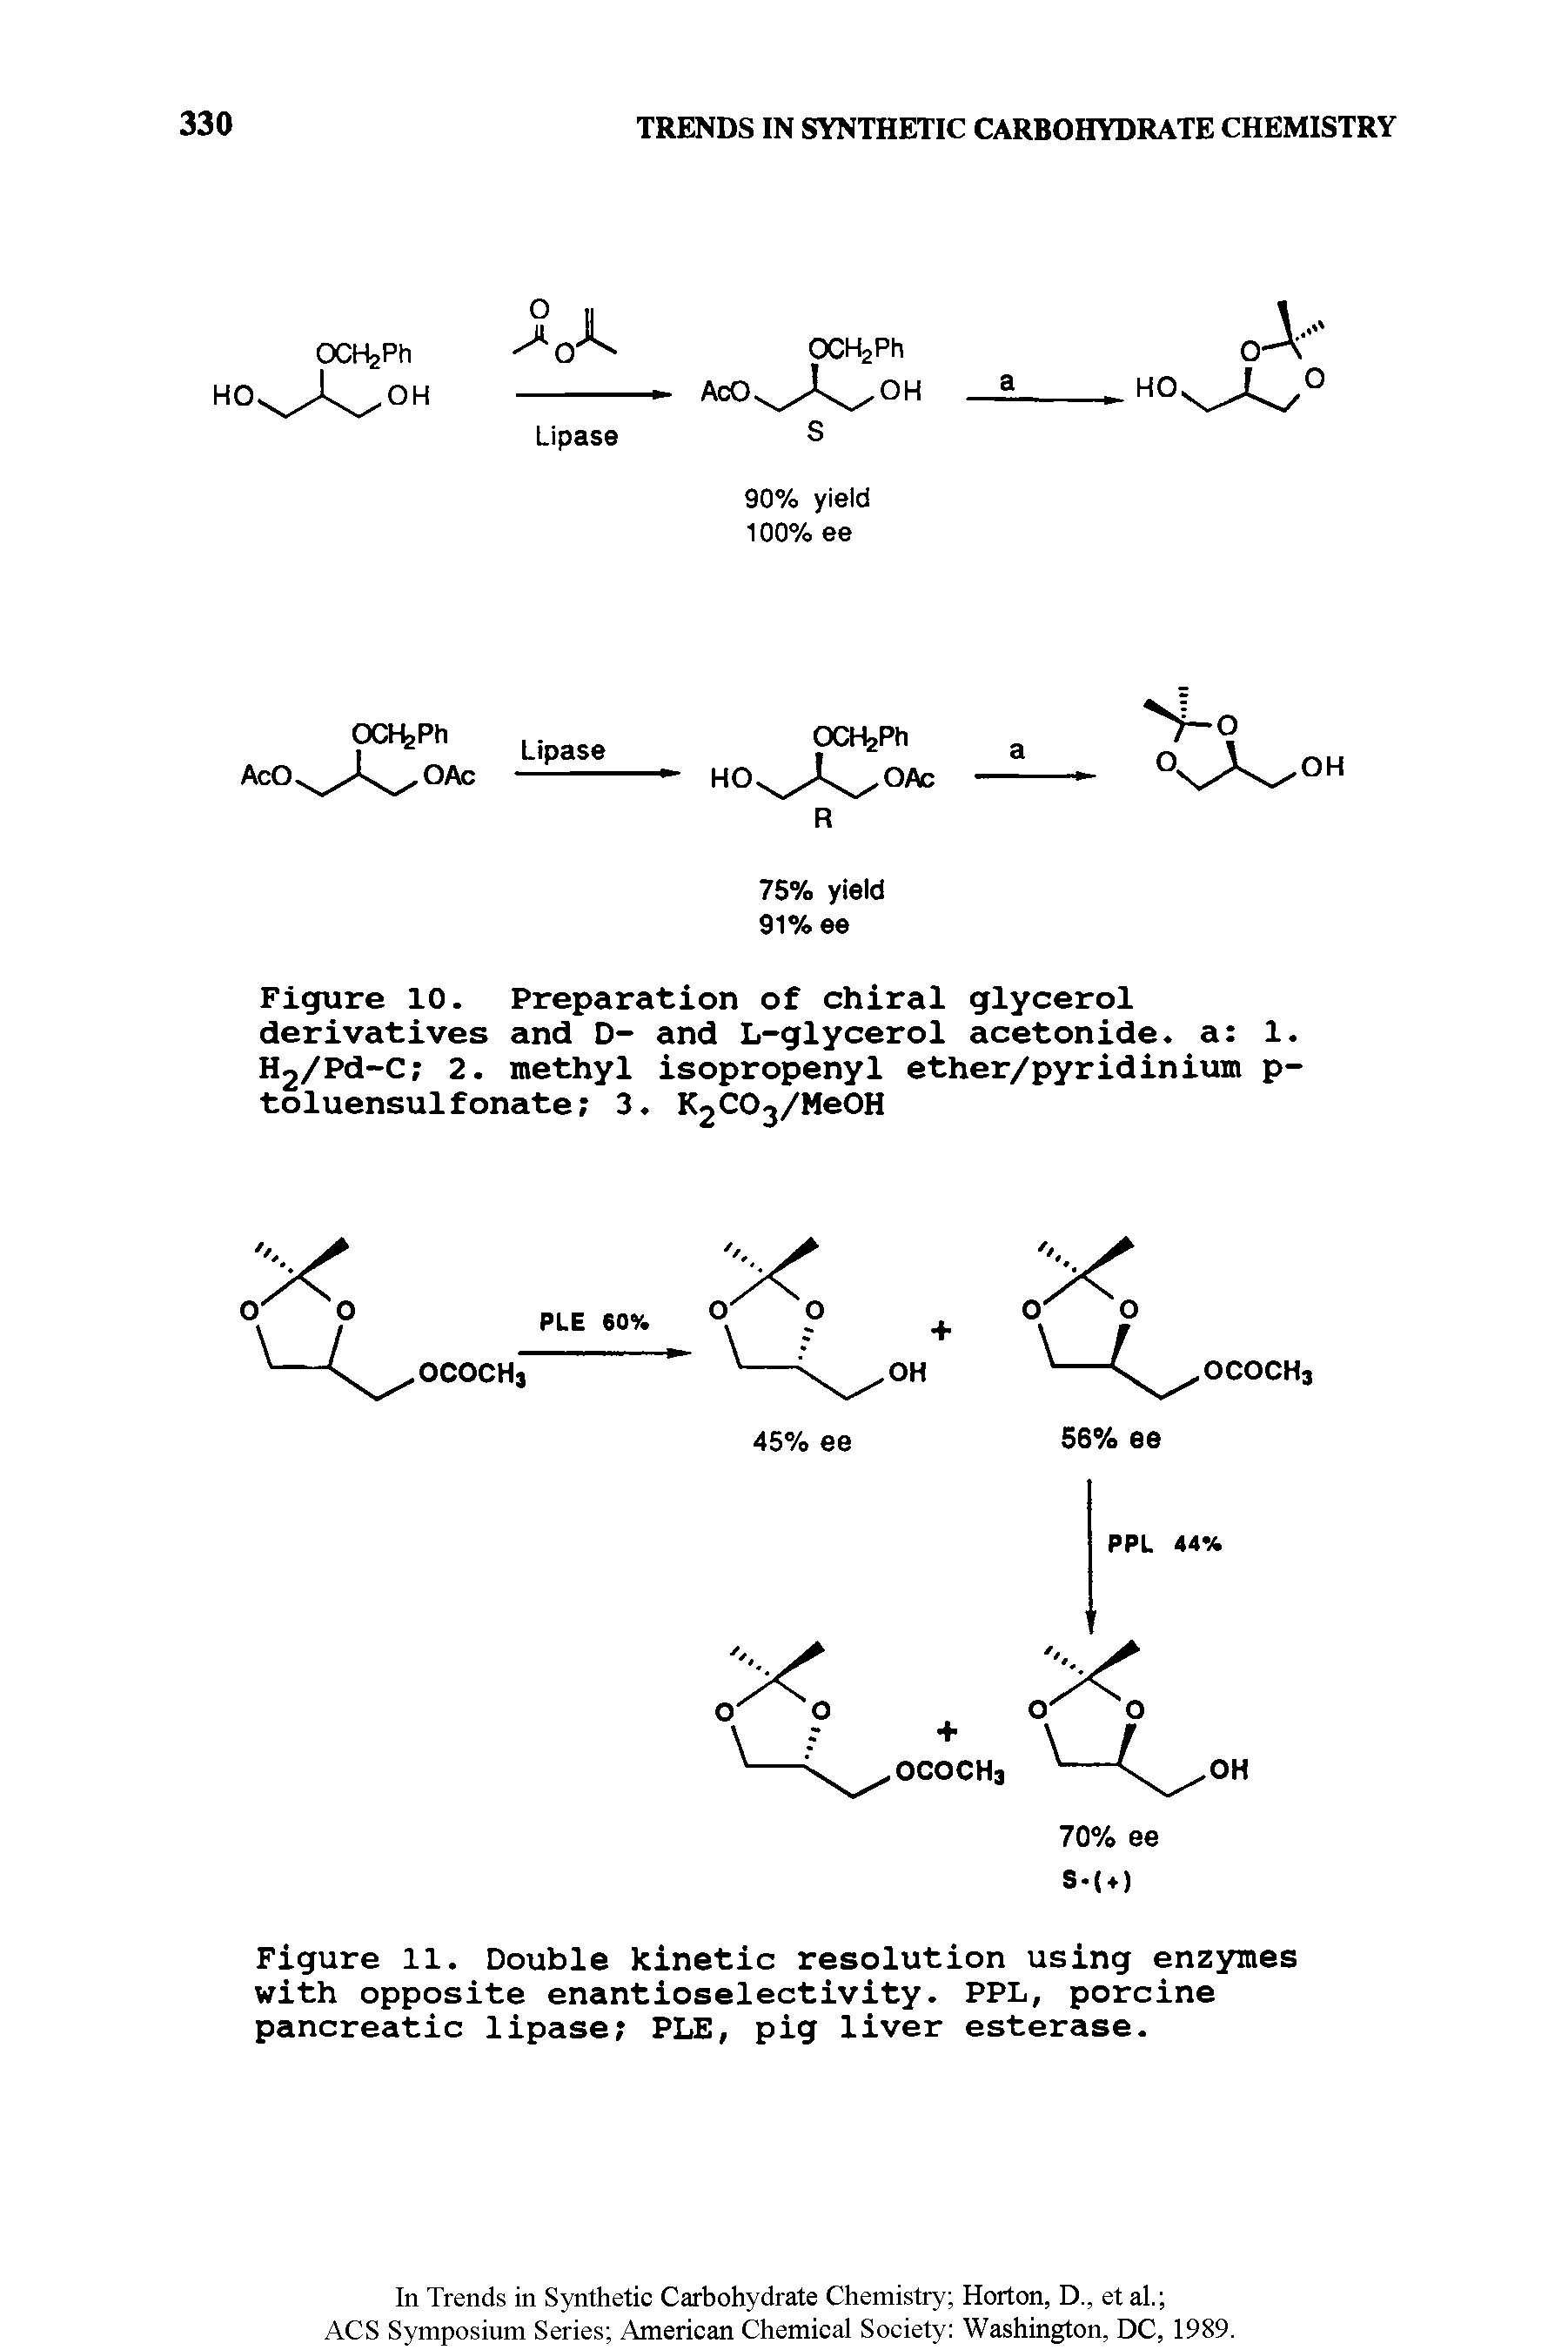 Figure 10. Preparation of chiral glycerol derivatives and D- and L-glycerol acetonide. a 1. Hj/Pd-C 2. methyl isopropenyl ether/pyridinium p-toluensulfonate 3. K2C03/Me0H...